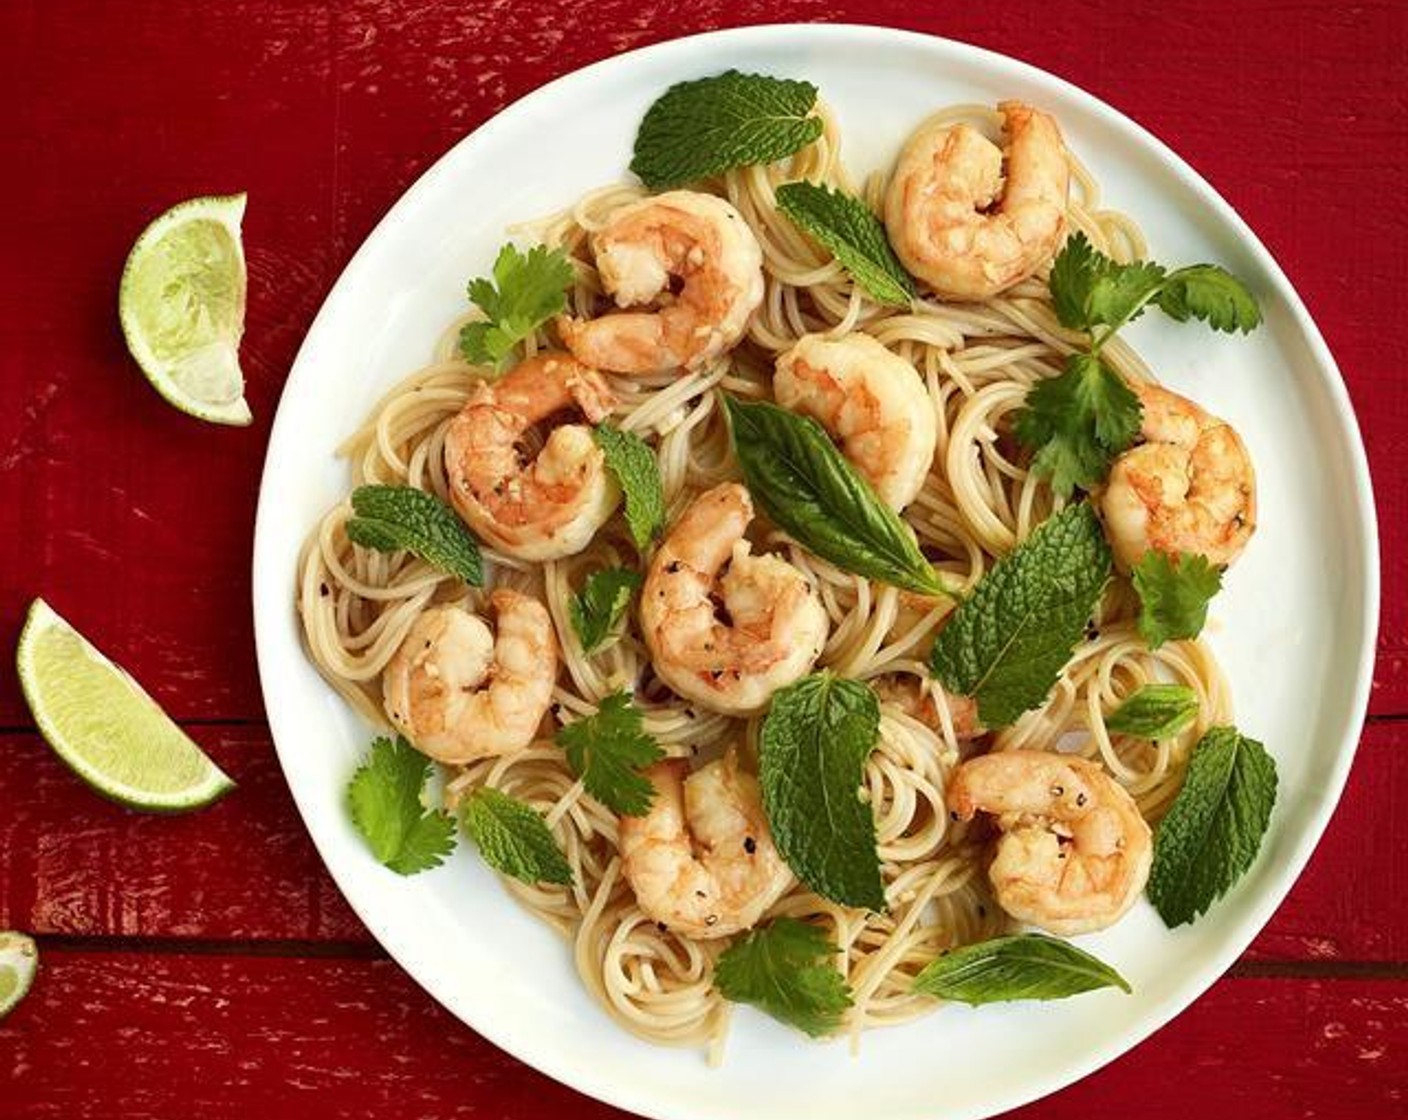 Malaysian Black Pepper Shrimp with Vermicelli